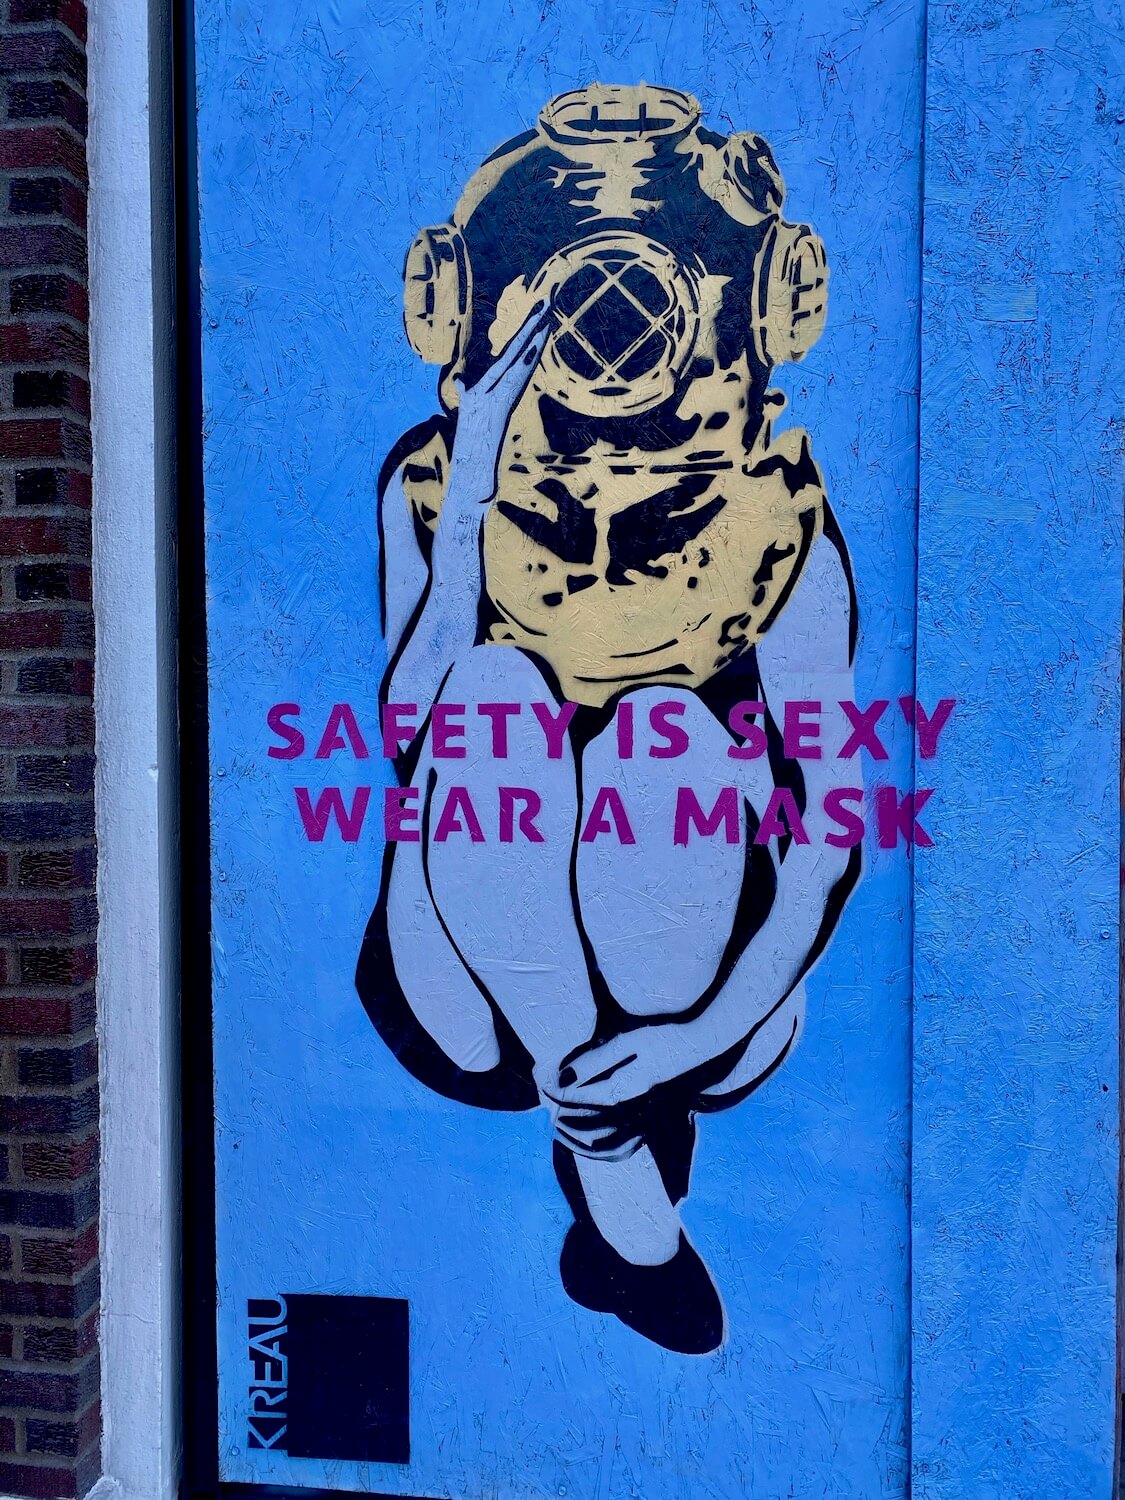 This mural painted on a piece of plywood covering a store front shows a woman sitting down wearing an old fashioned scuba diving metal helmet.  The background is blue and lettering in purple says, "Safety is sexy.  Wear a mask."  